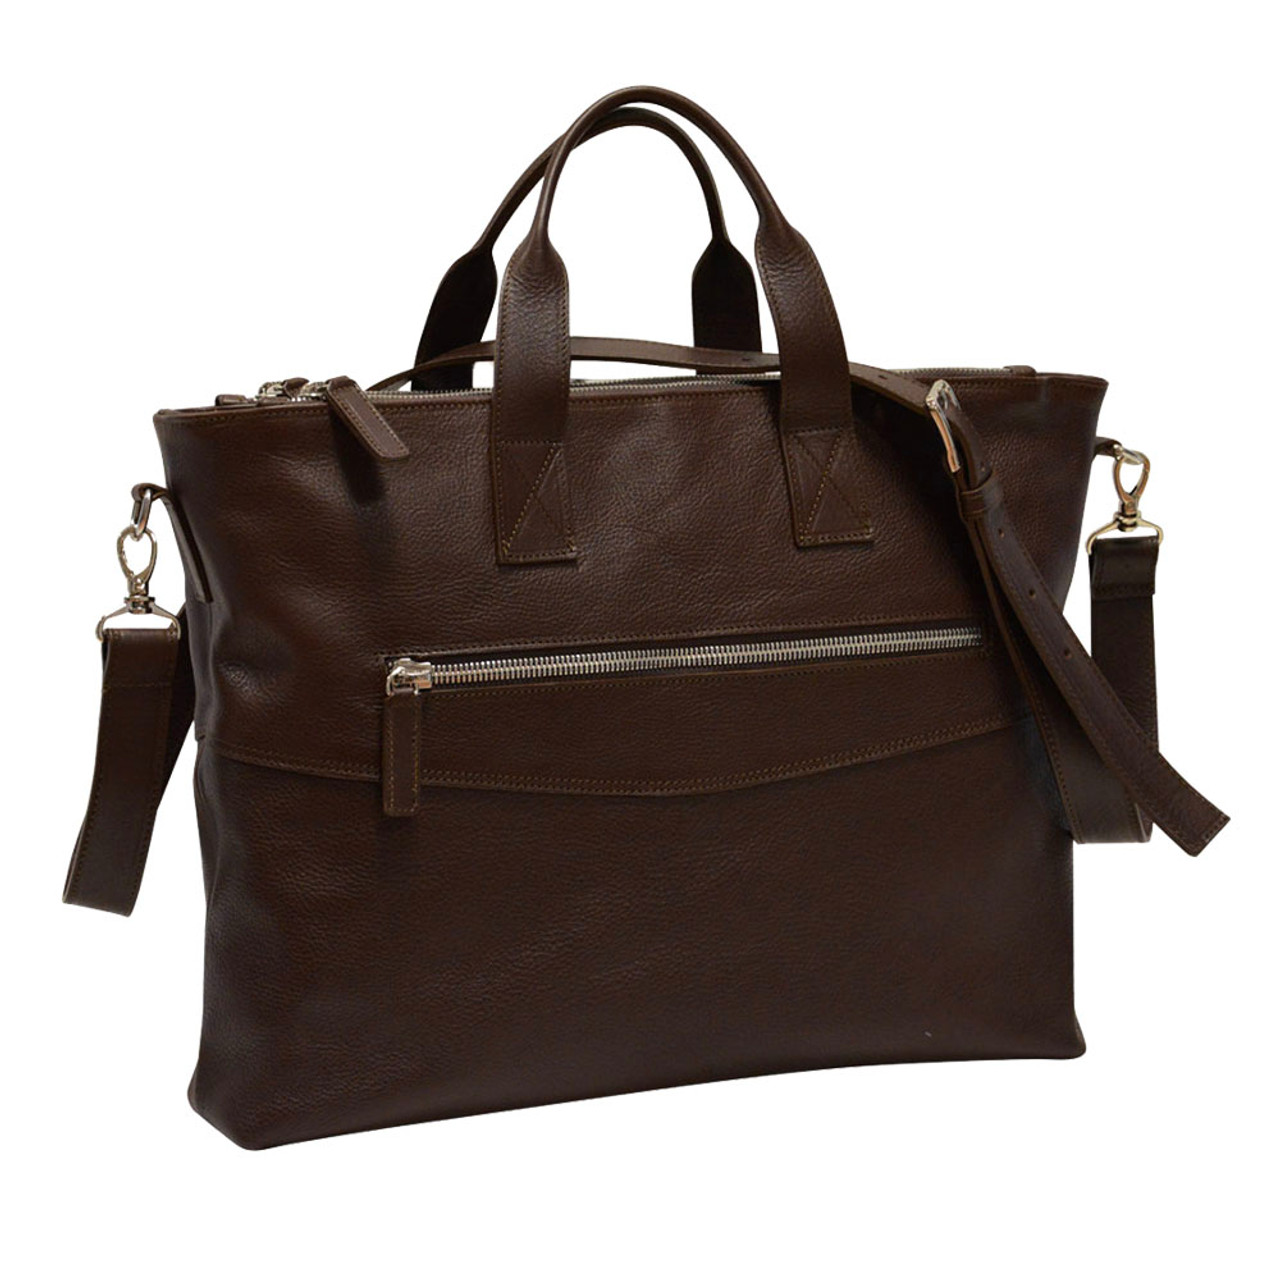 San Marco Bag Terrida - Made in Italy, vegetable tanned leather